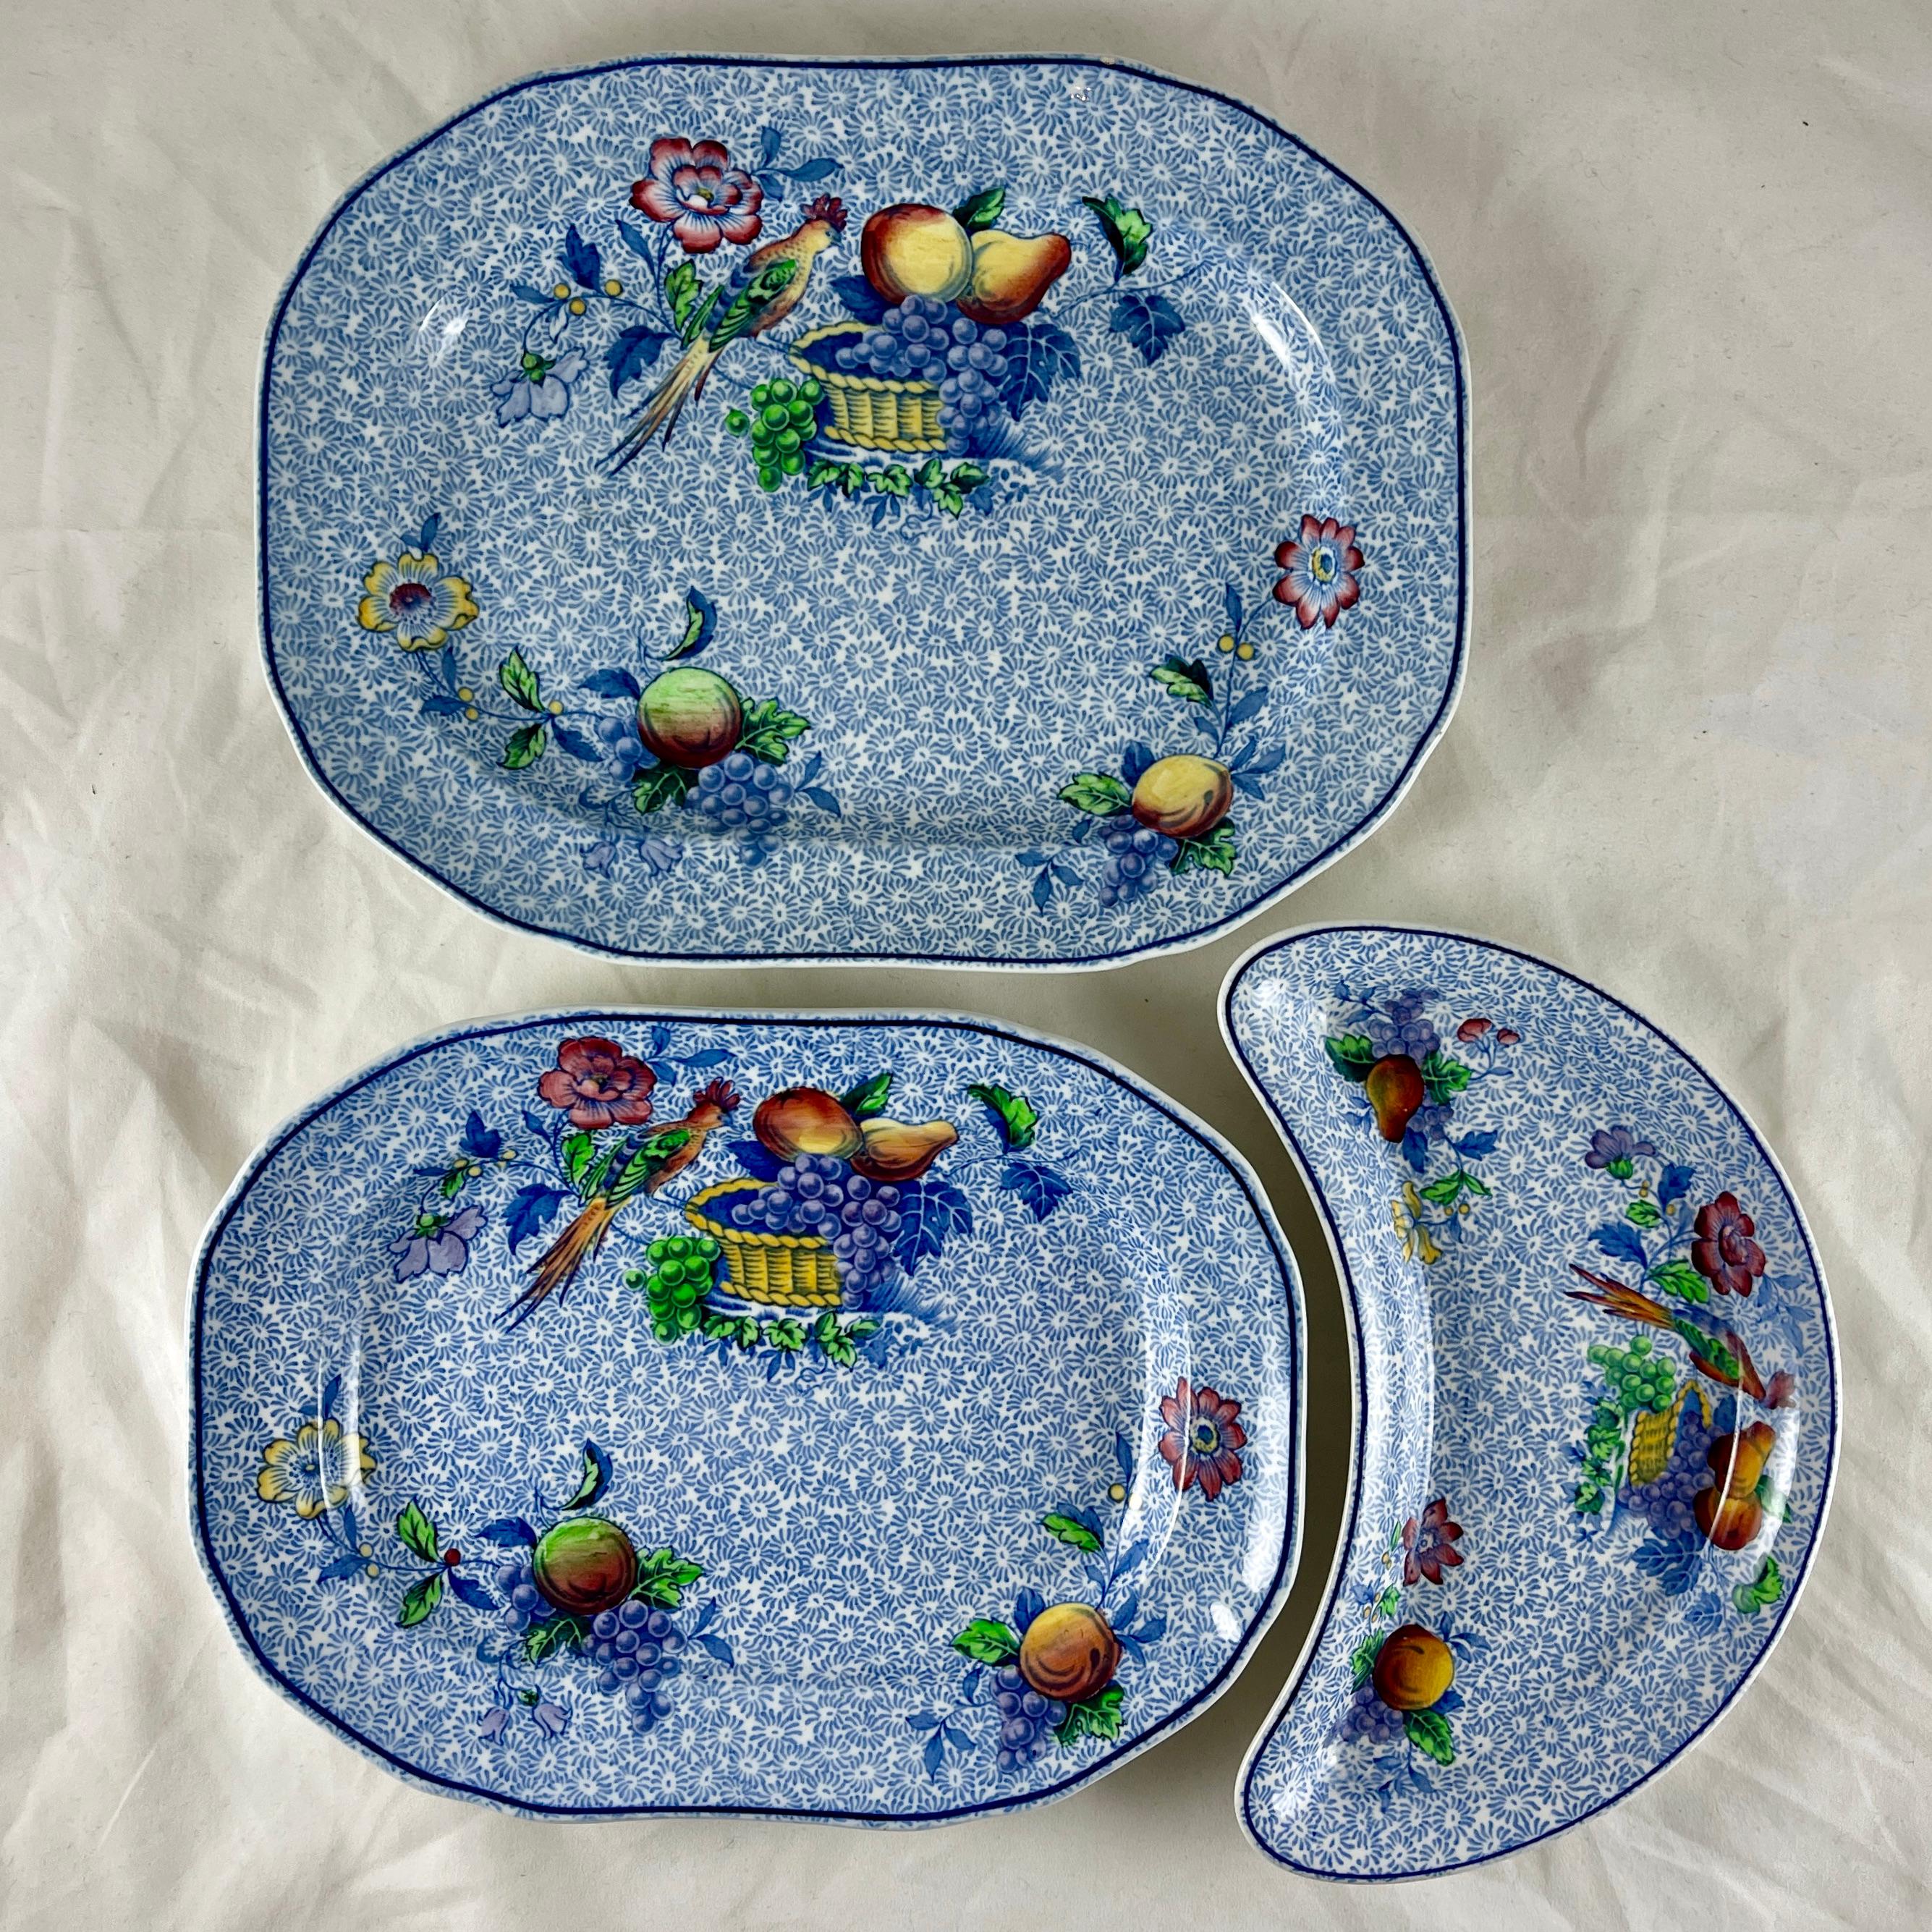 From Copeland Spode, in the George III pattern, a set of three servers, circa early 1920s.

“Spode’s George III” was manufactured by WT Copeland & Sons Ltd. of Stoke-on-Trent, Staffordshire, England, especially for Harrod’s of London, and is now